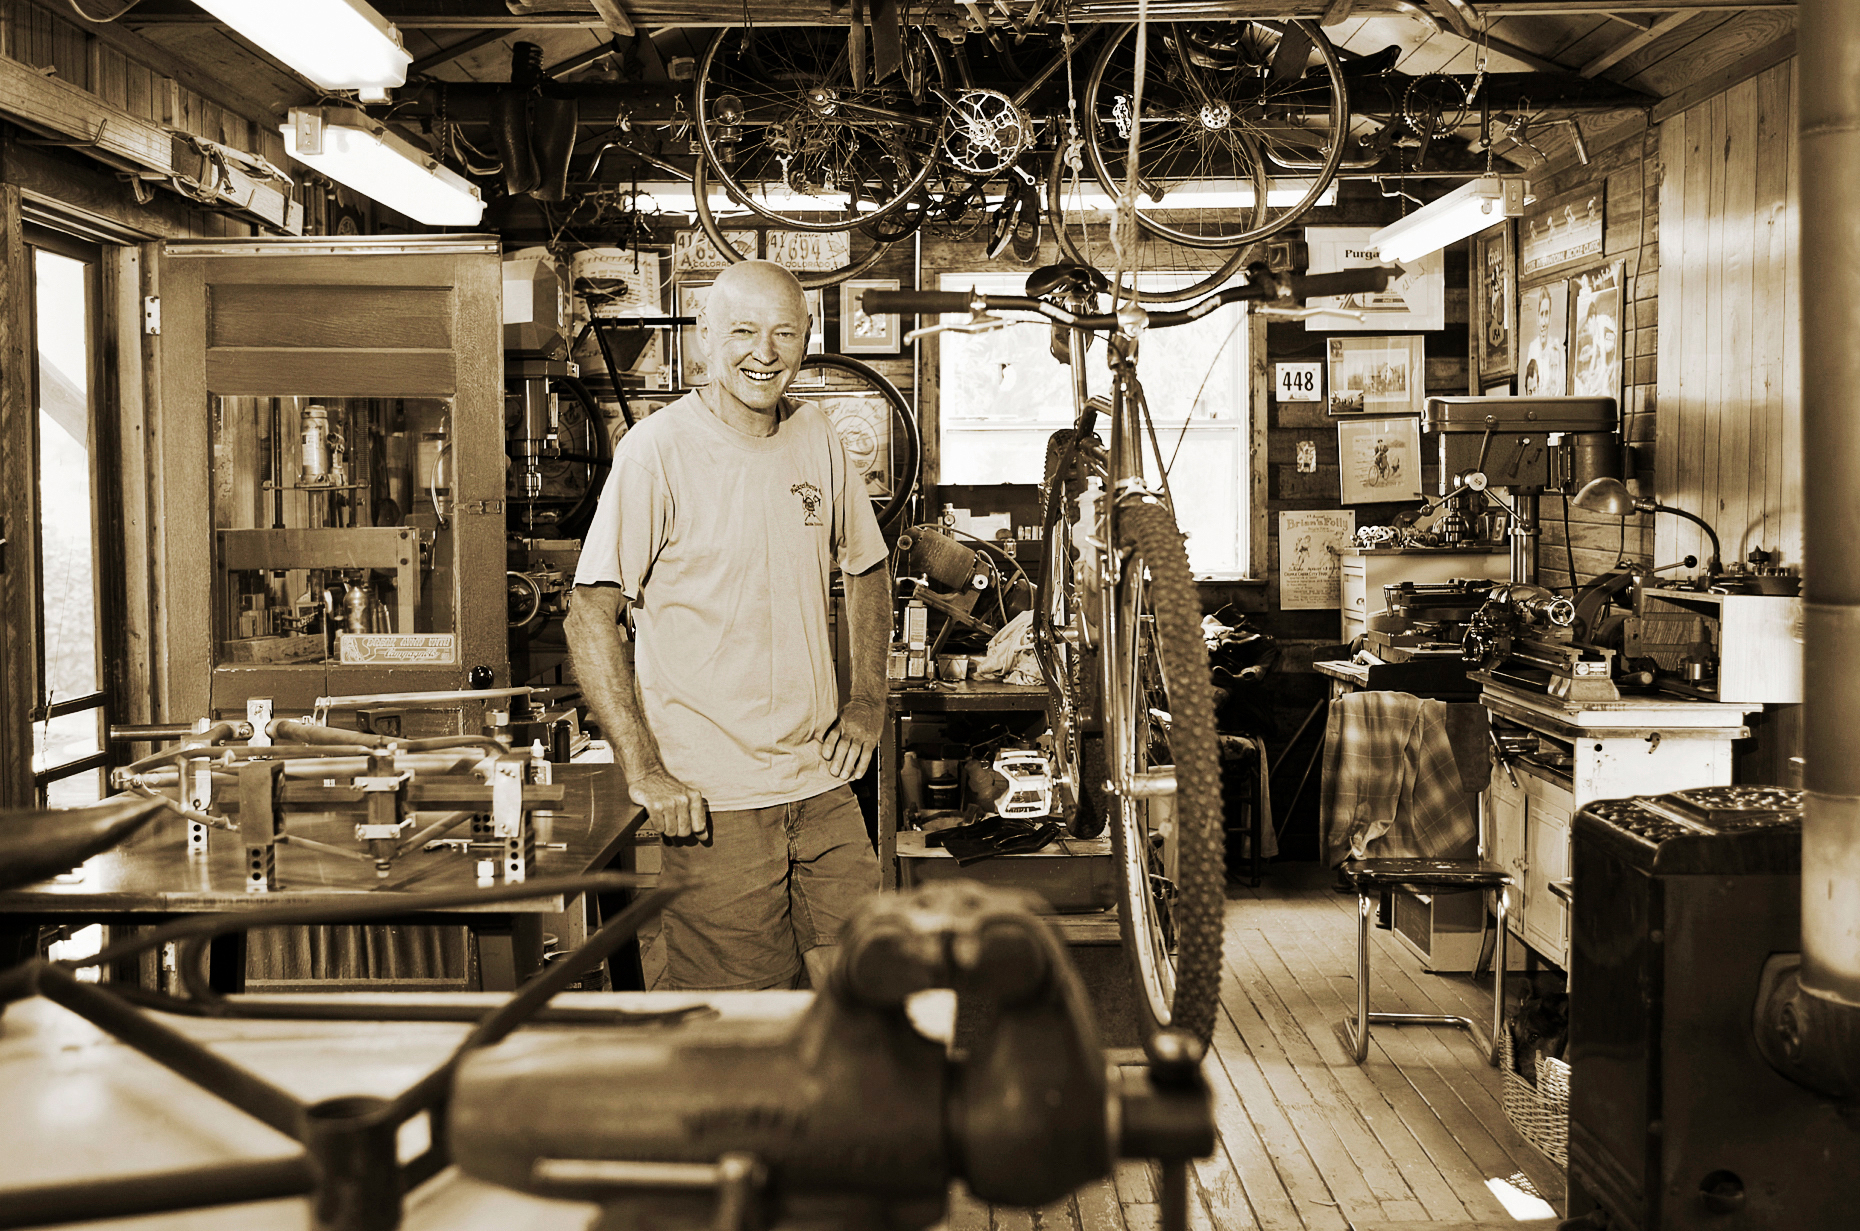 Custom bicycle frame builder Don McClung photographed in his workshop along the Arkansas River in Salida, Colorado, USA